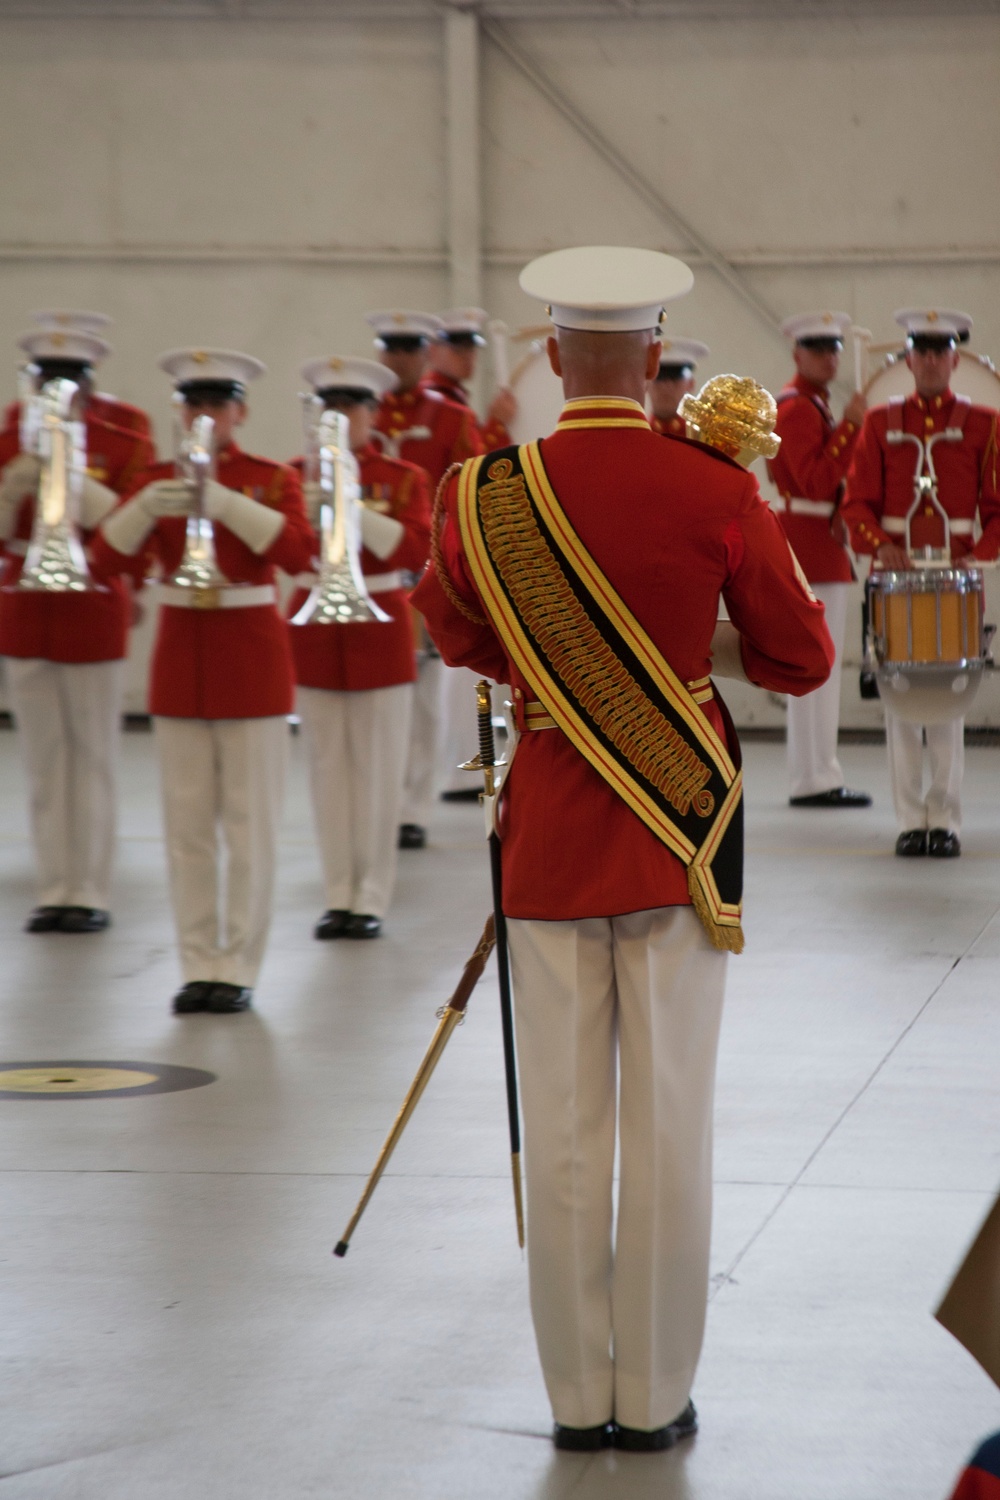 DVIDS - Images - Drum and Bugle Corps and Silent Drill Platoon perform ...